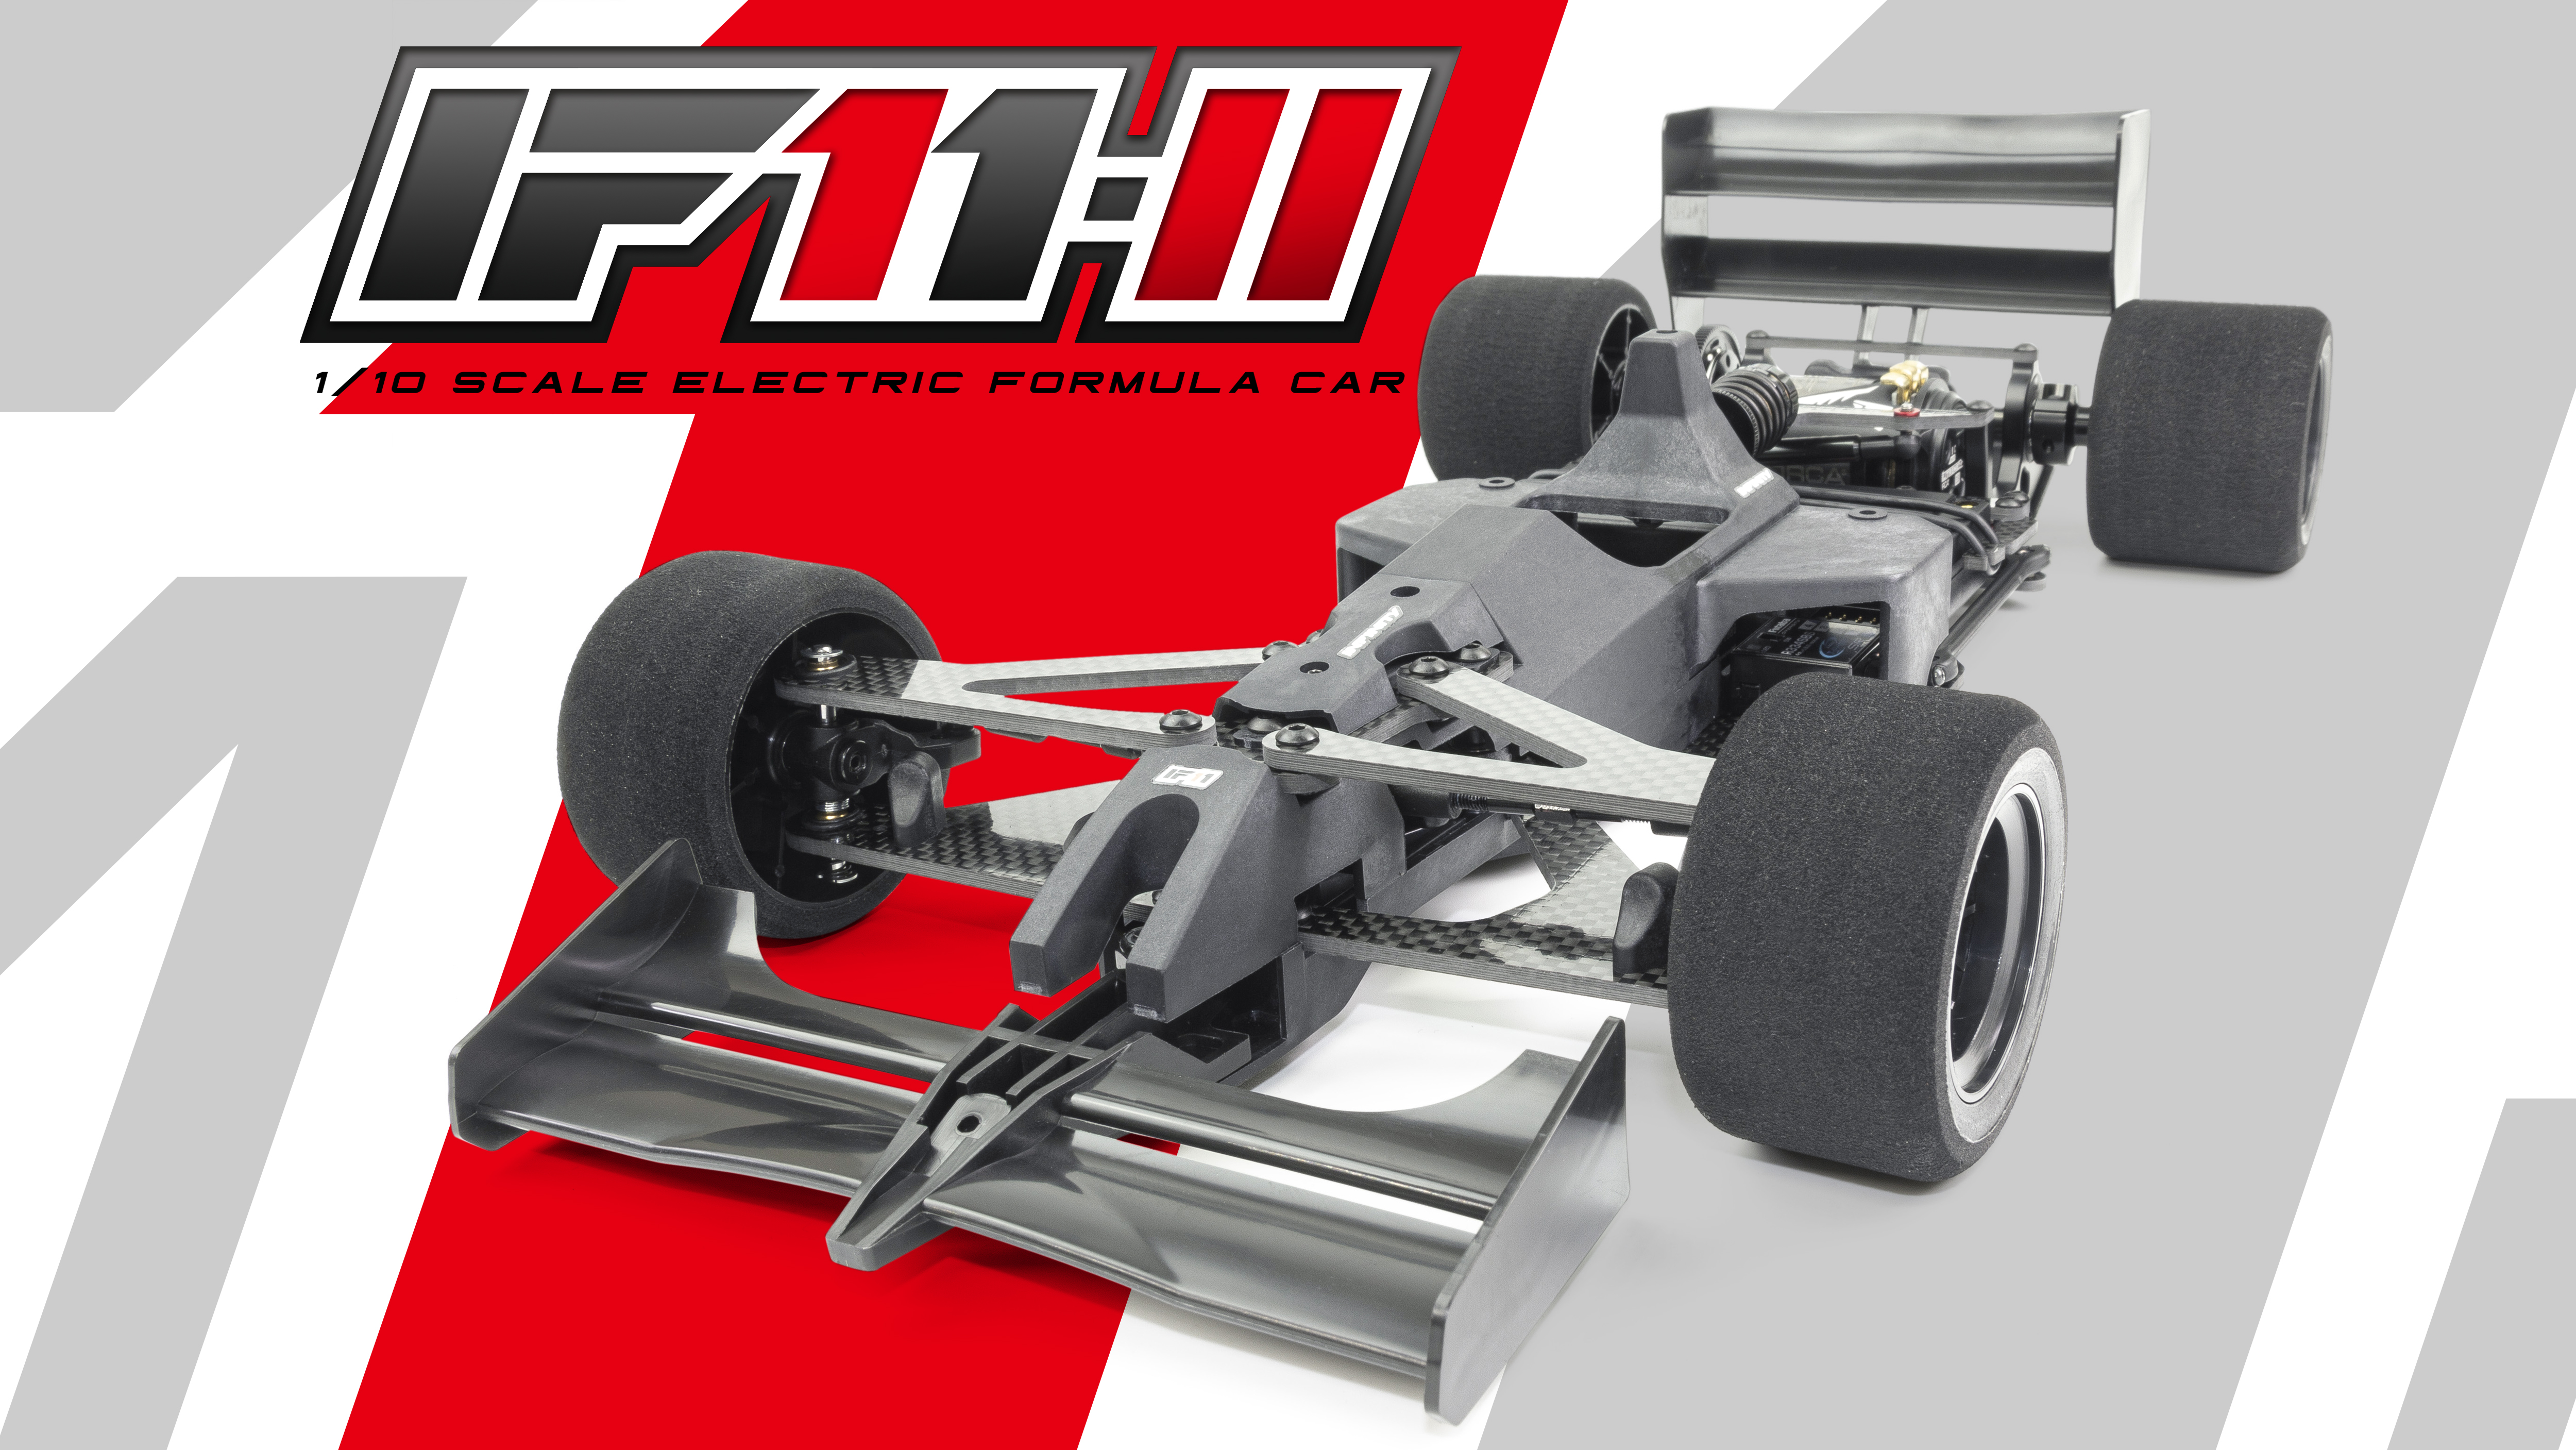 IF11-II 1/10 SCALE EP FORMULA CAR CHASSIS KIT